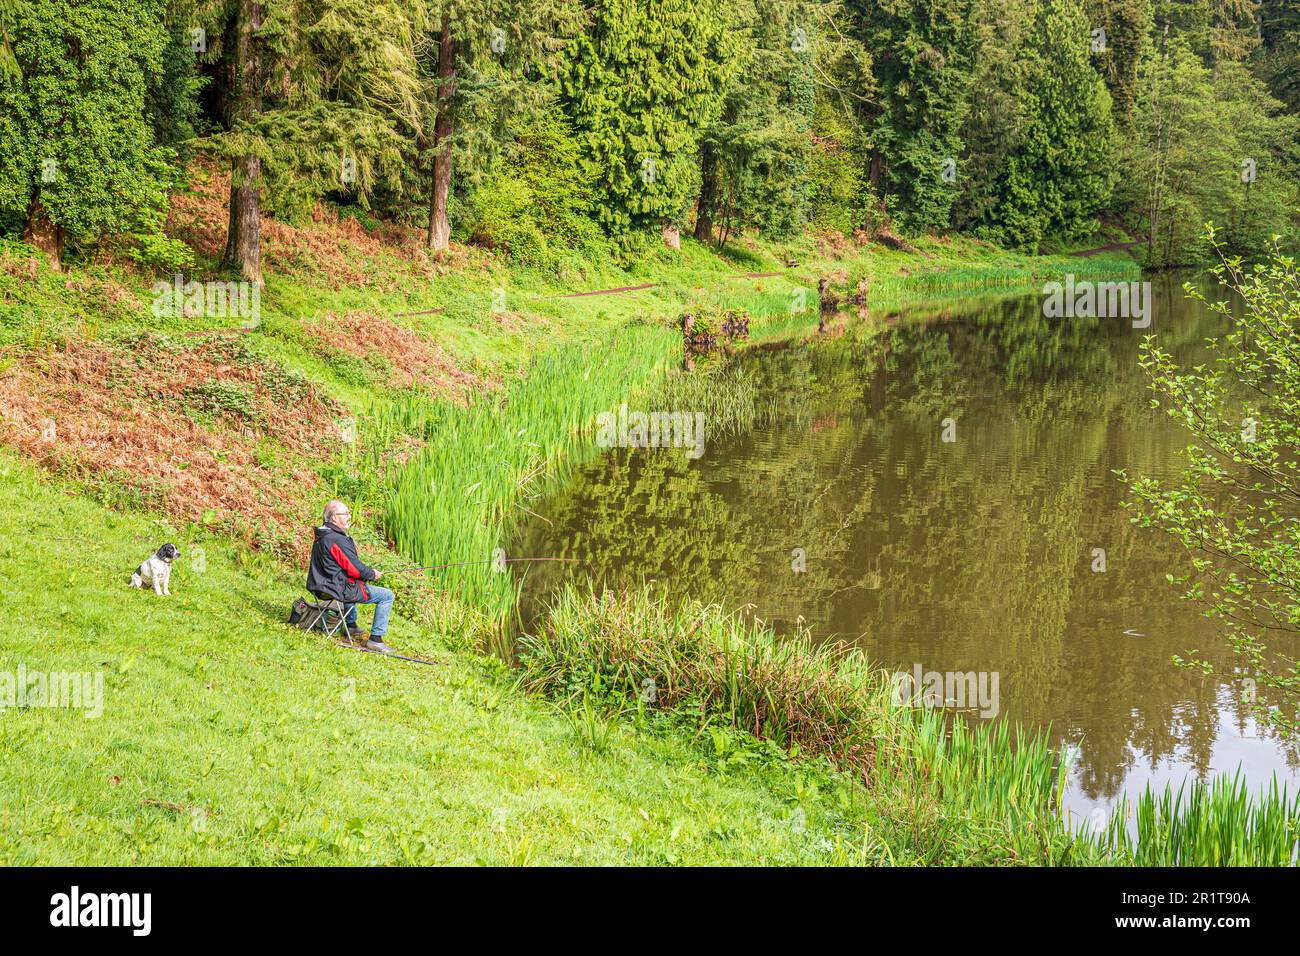 Angler, die in Soudley Ponds in Lower Soudley im Forest of Dean, Gloucestershire, England, angeln Stockfoto